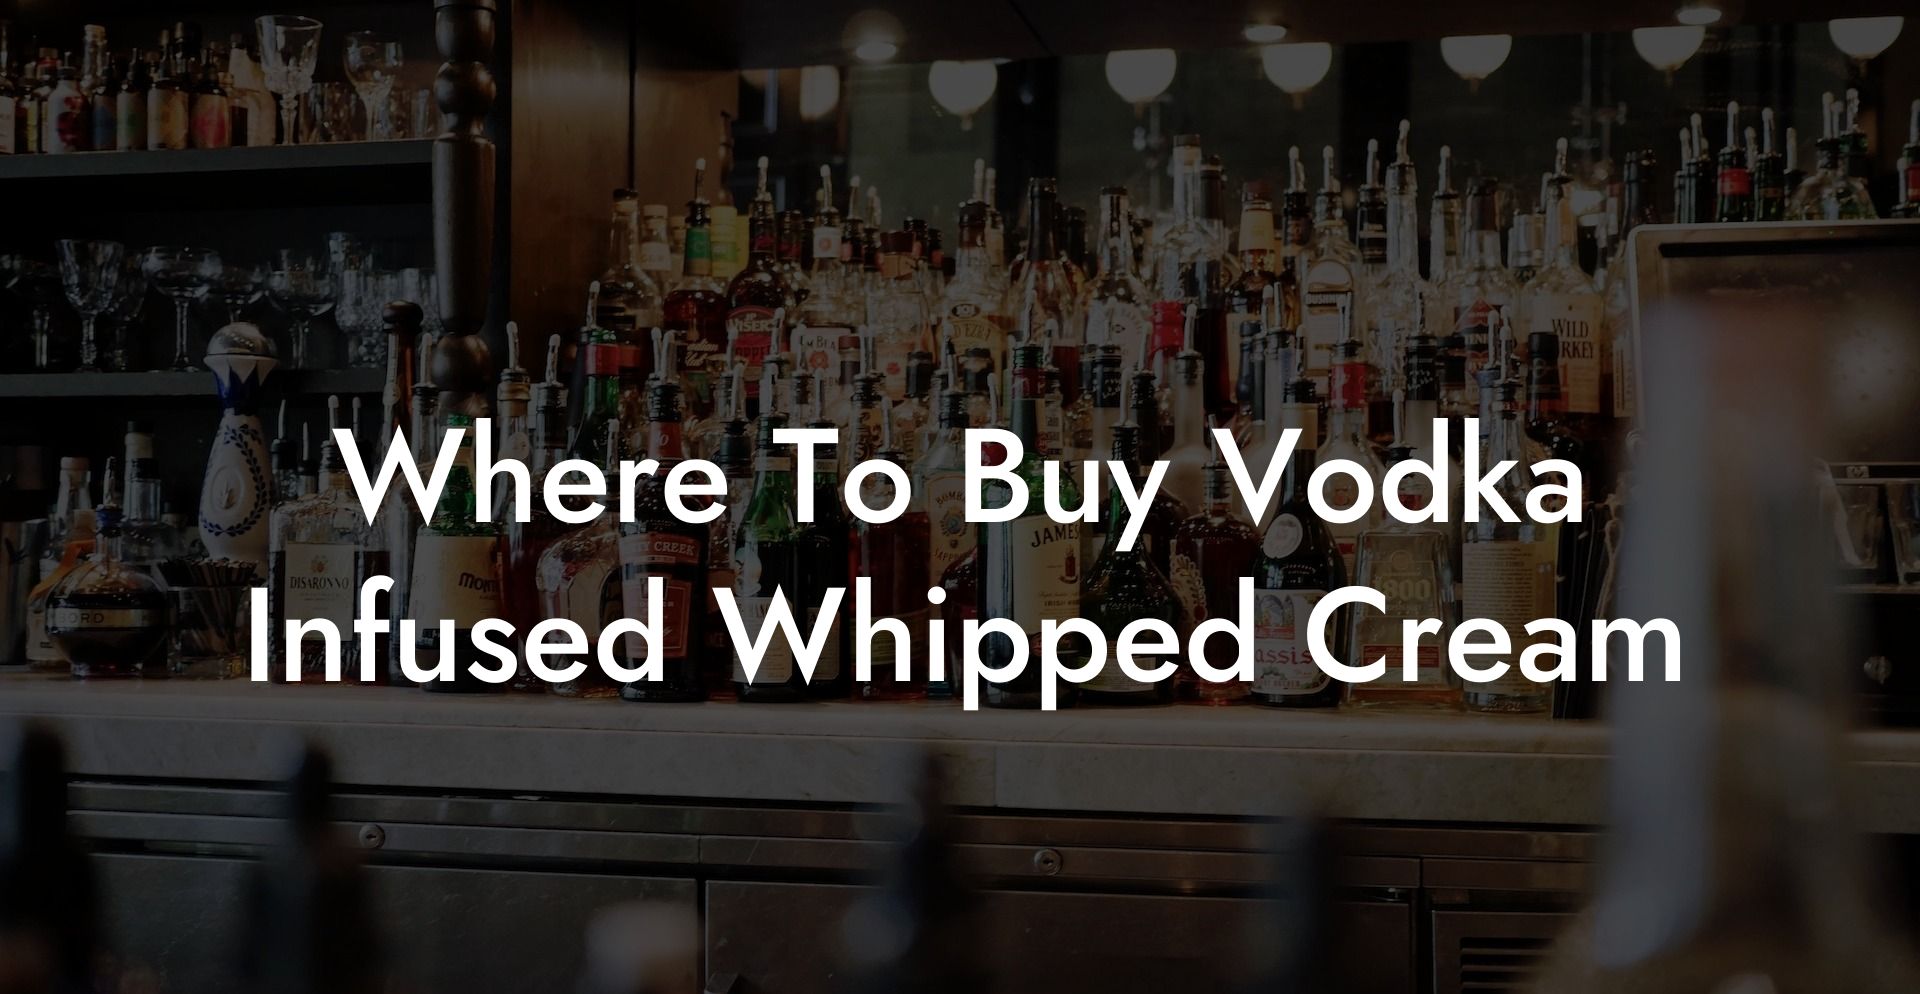 Where To Buy Vodka Infused Whipped Cream